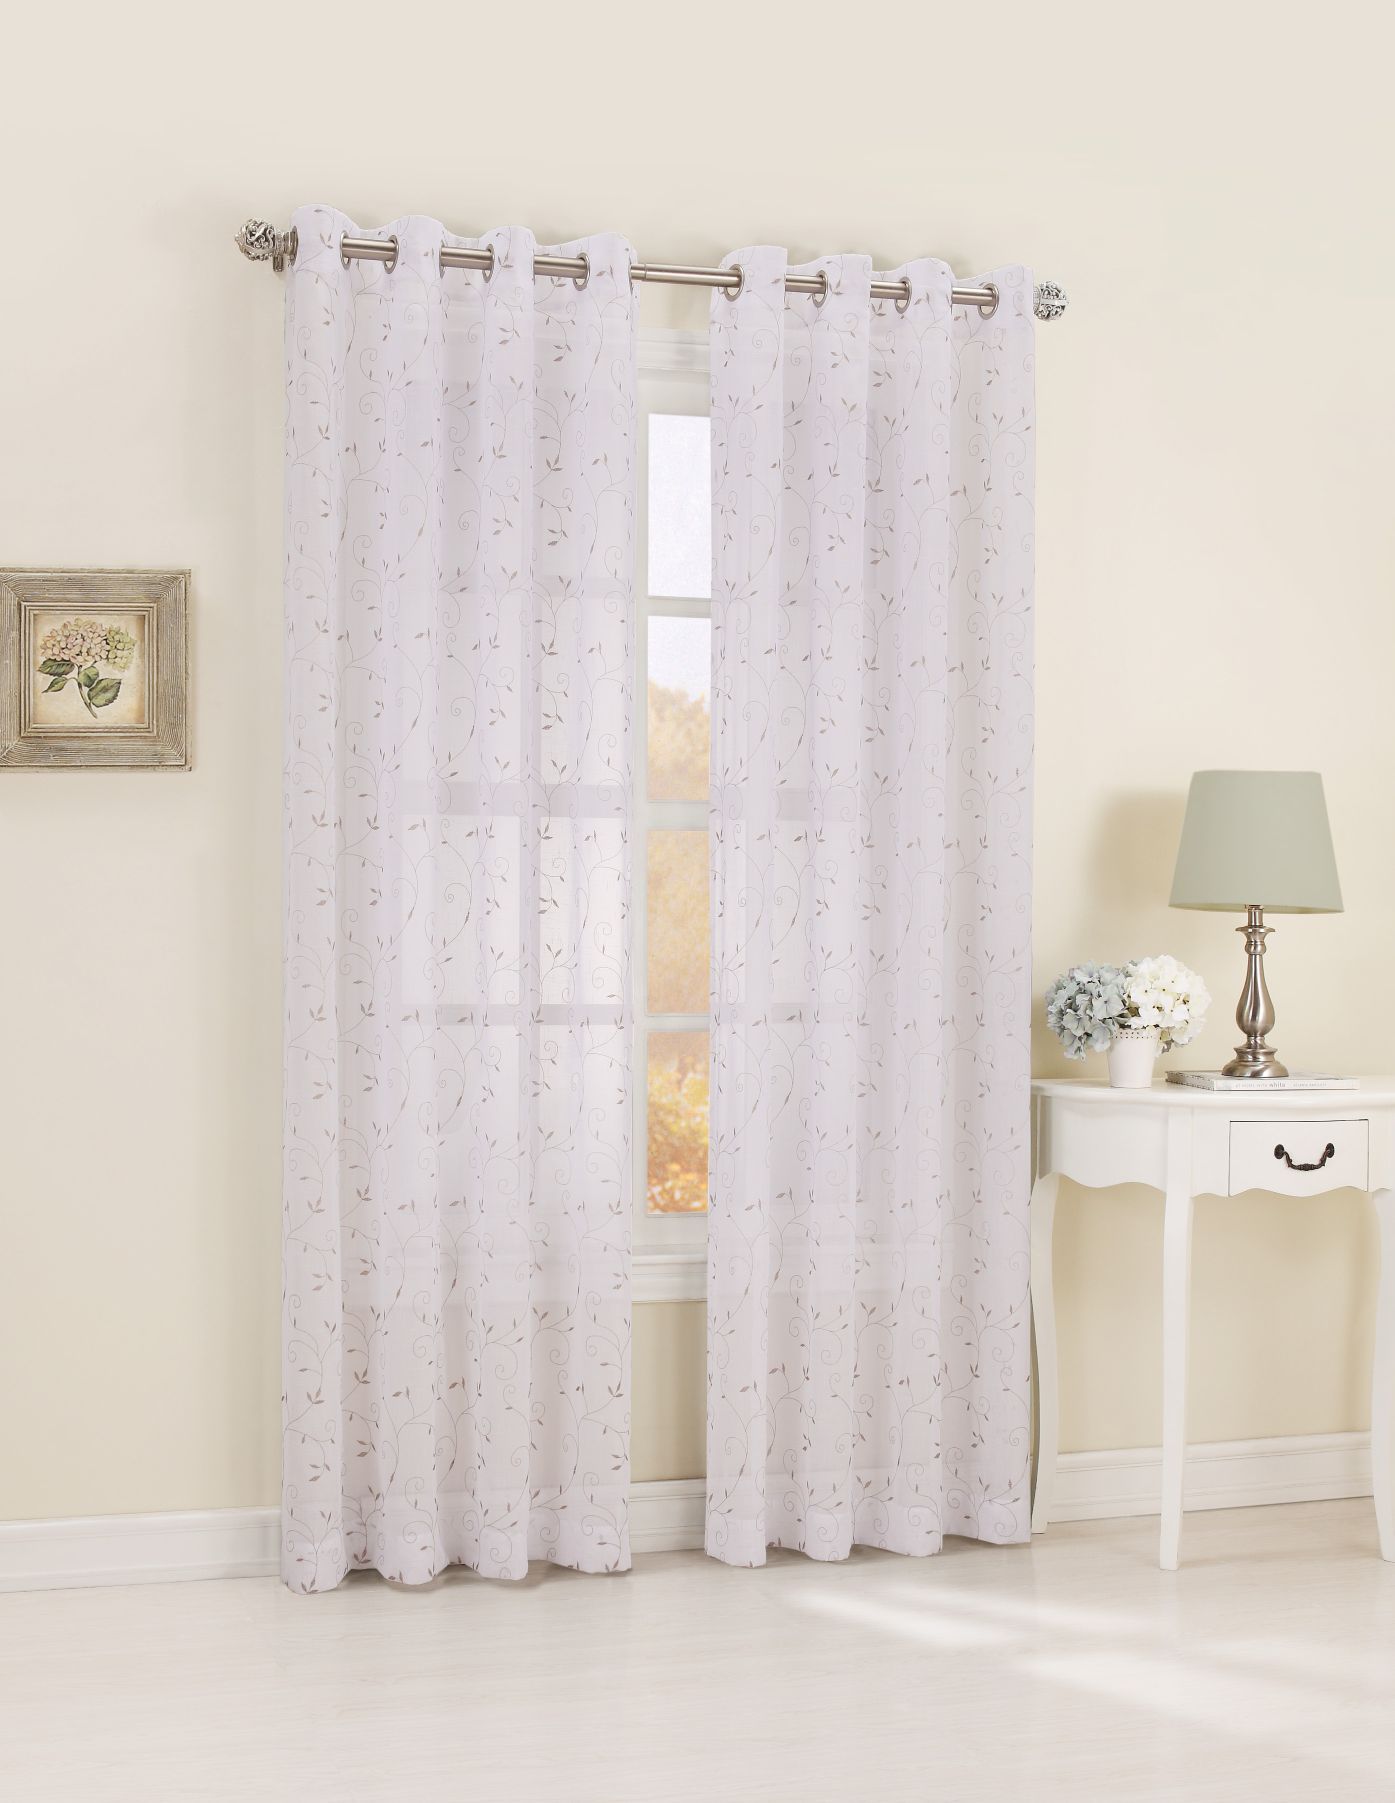 Celeste Embroidery Textured and Embroidered Semi-Sheer Grommet Panel